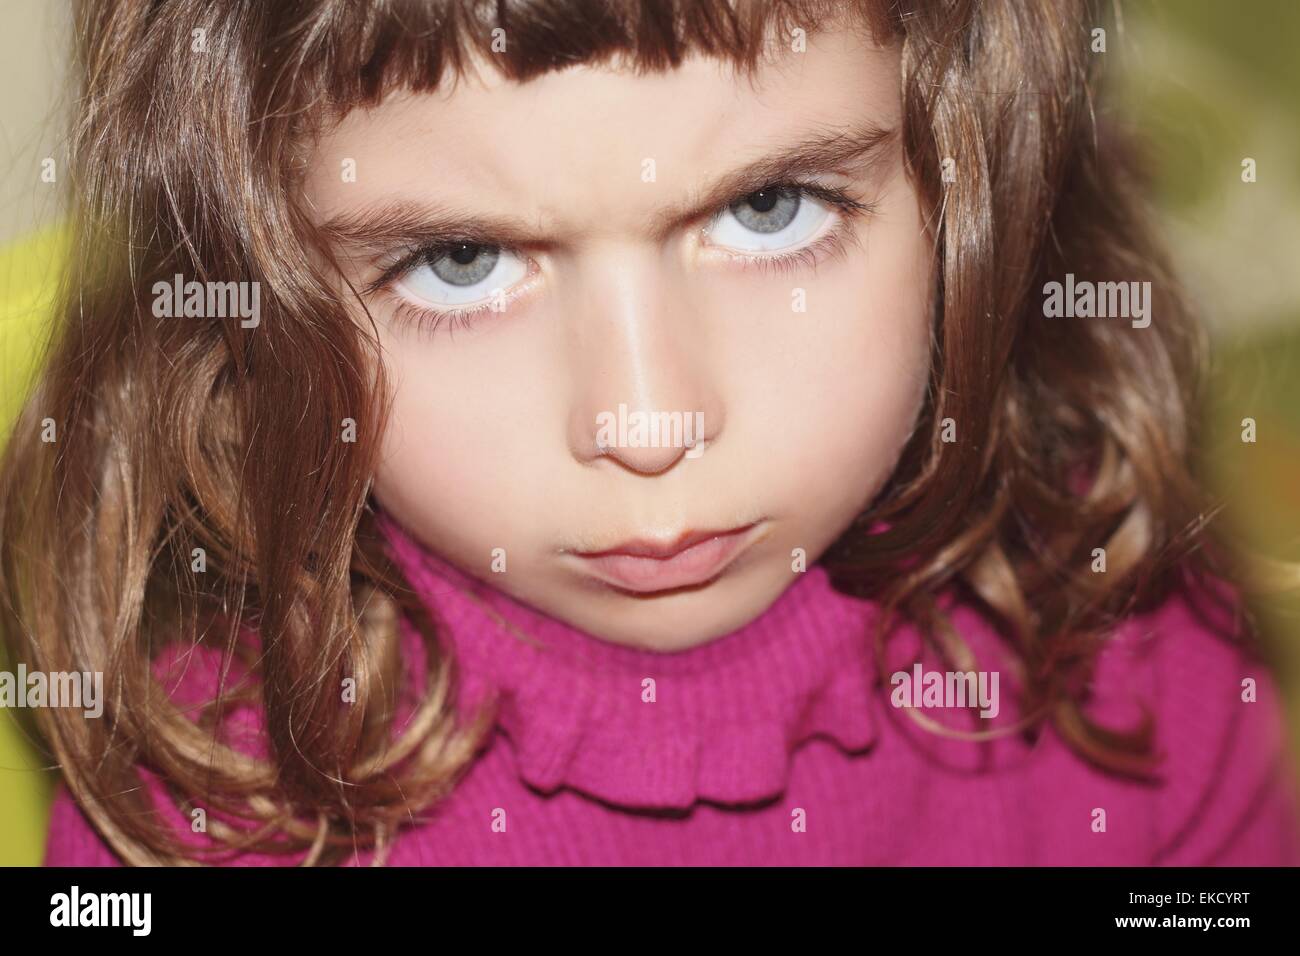 defy outface little girl portrait looking gesture Stock Photo